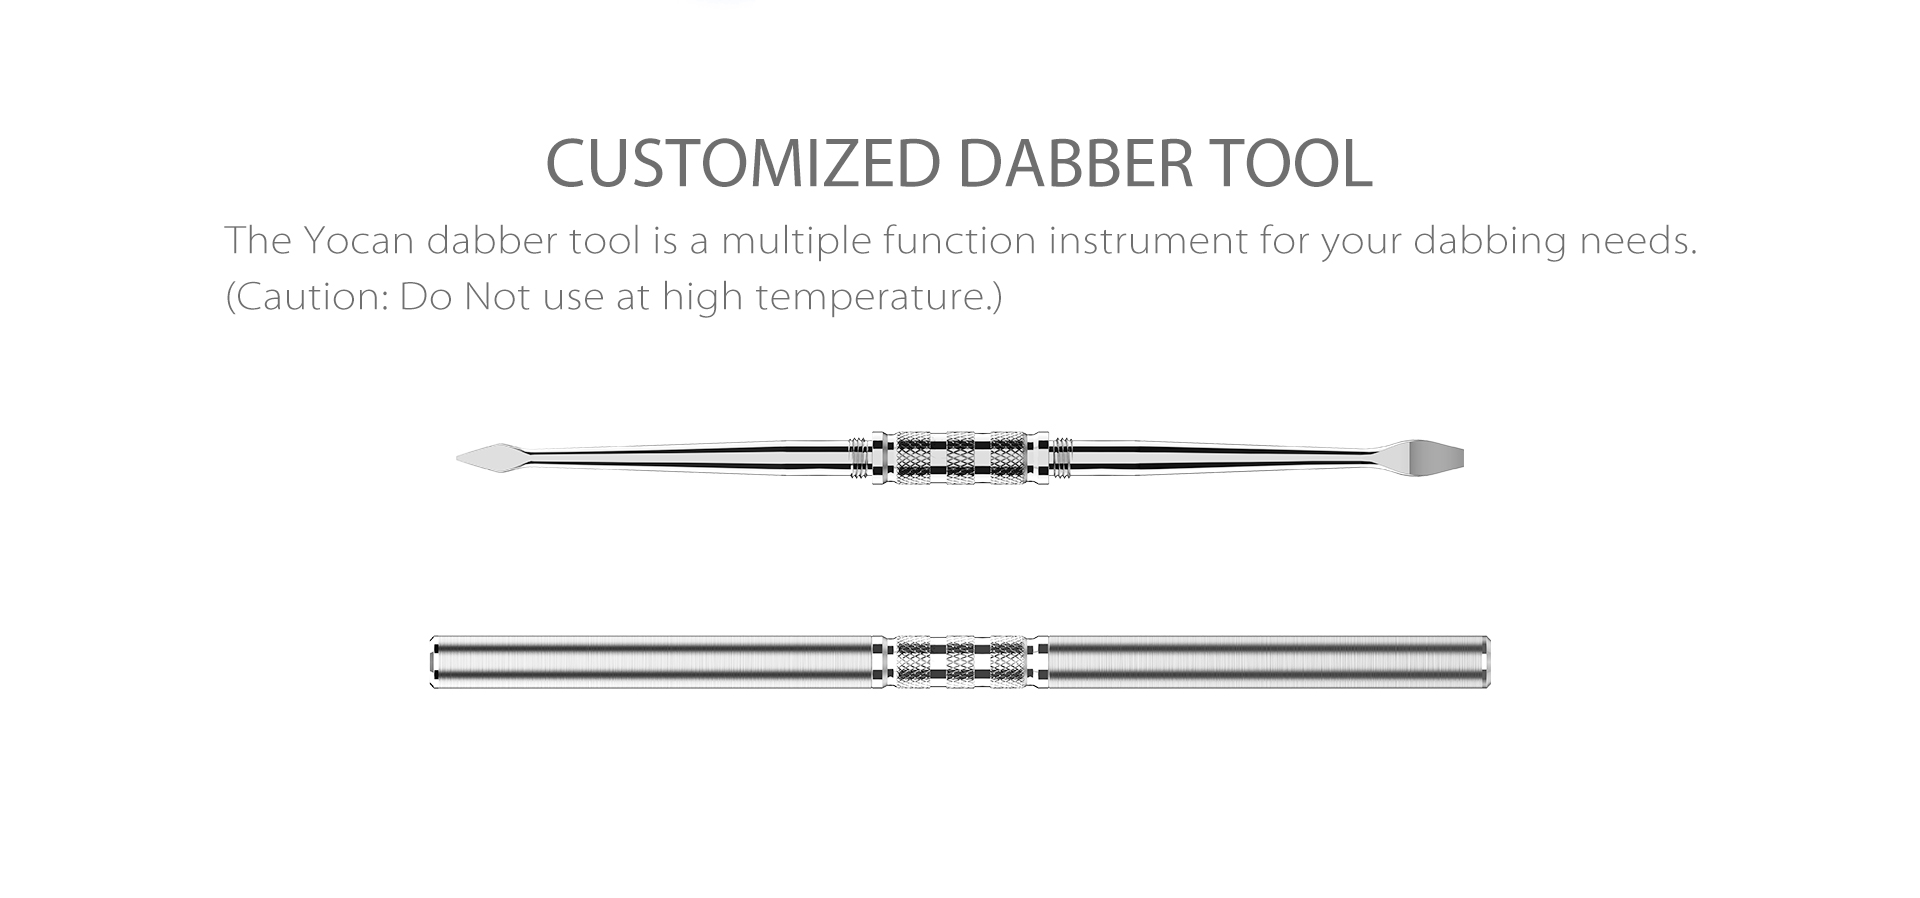 Yocan Falcon Vaporizer comes with multiple function dabber tool.